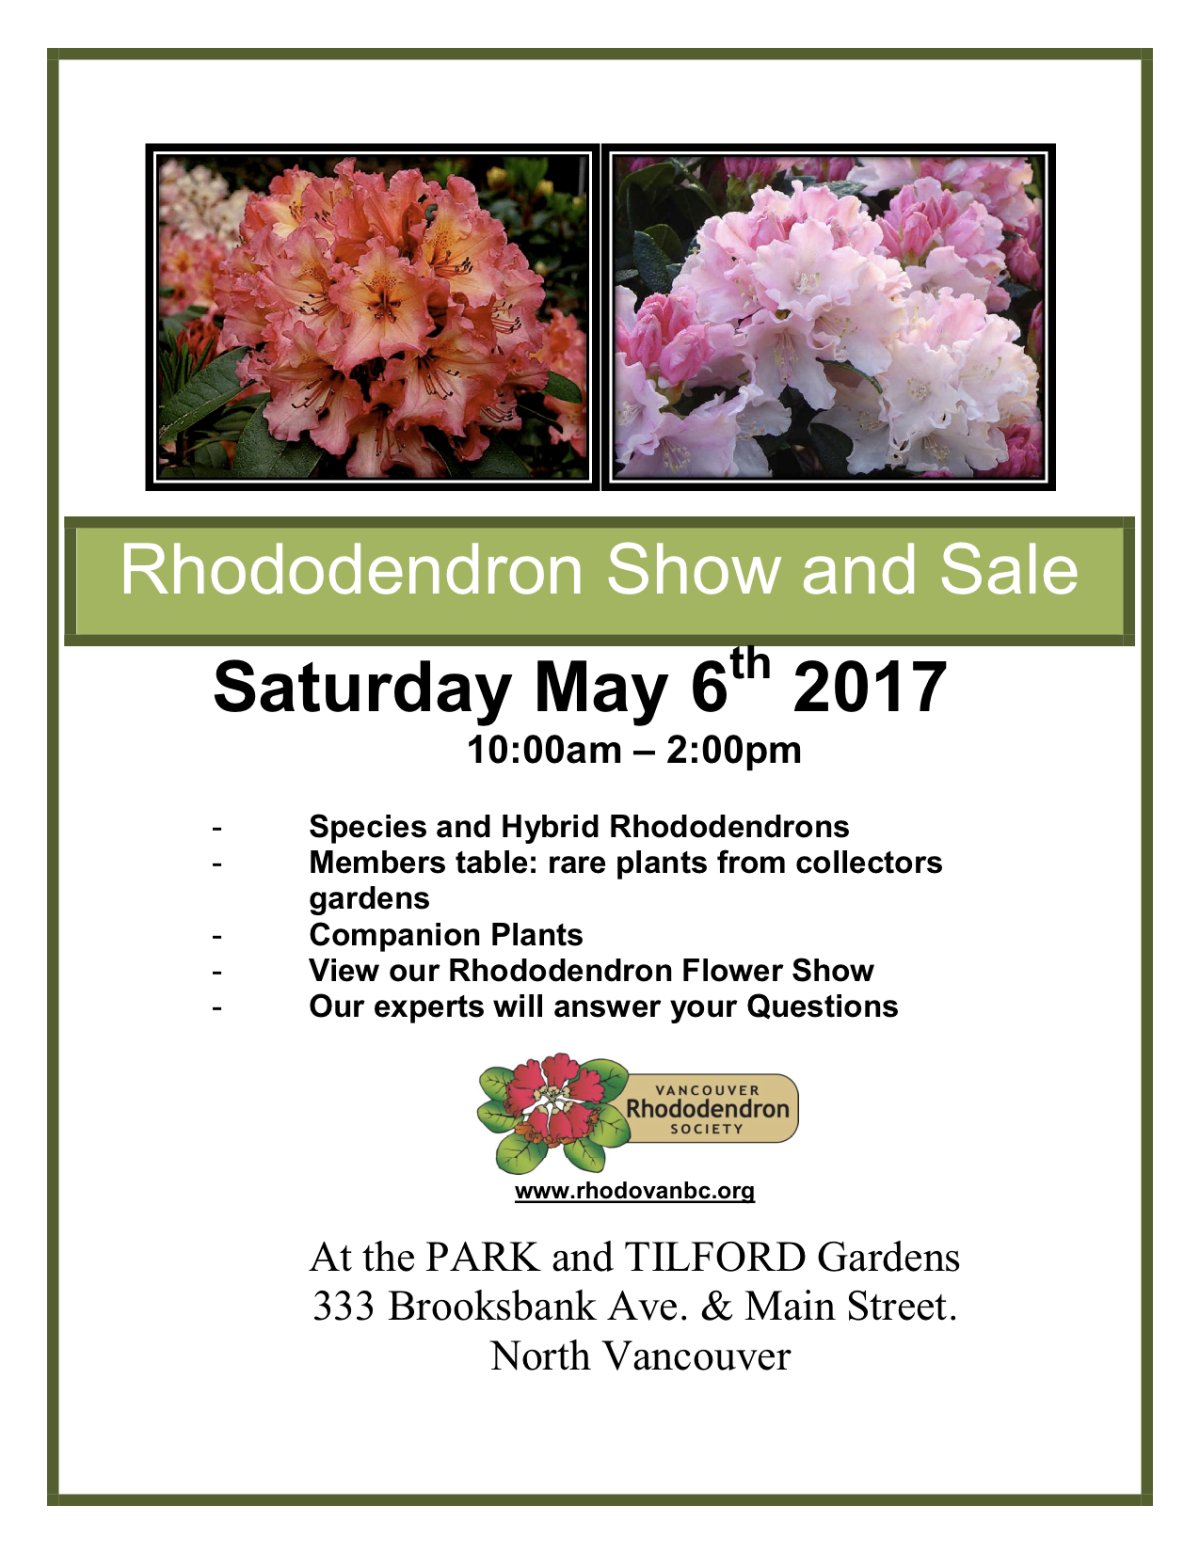 ANNUAL RHODODENDRON SHOW & SALE - image